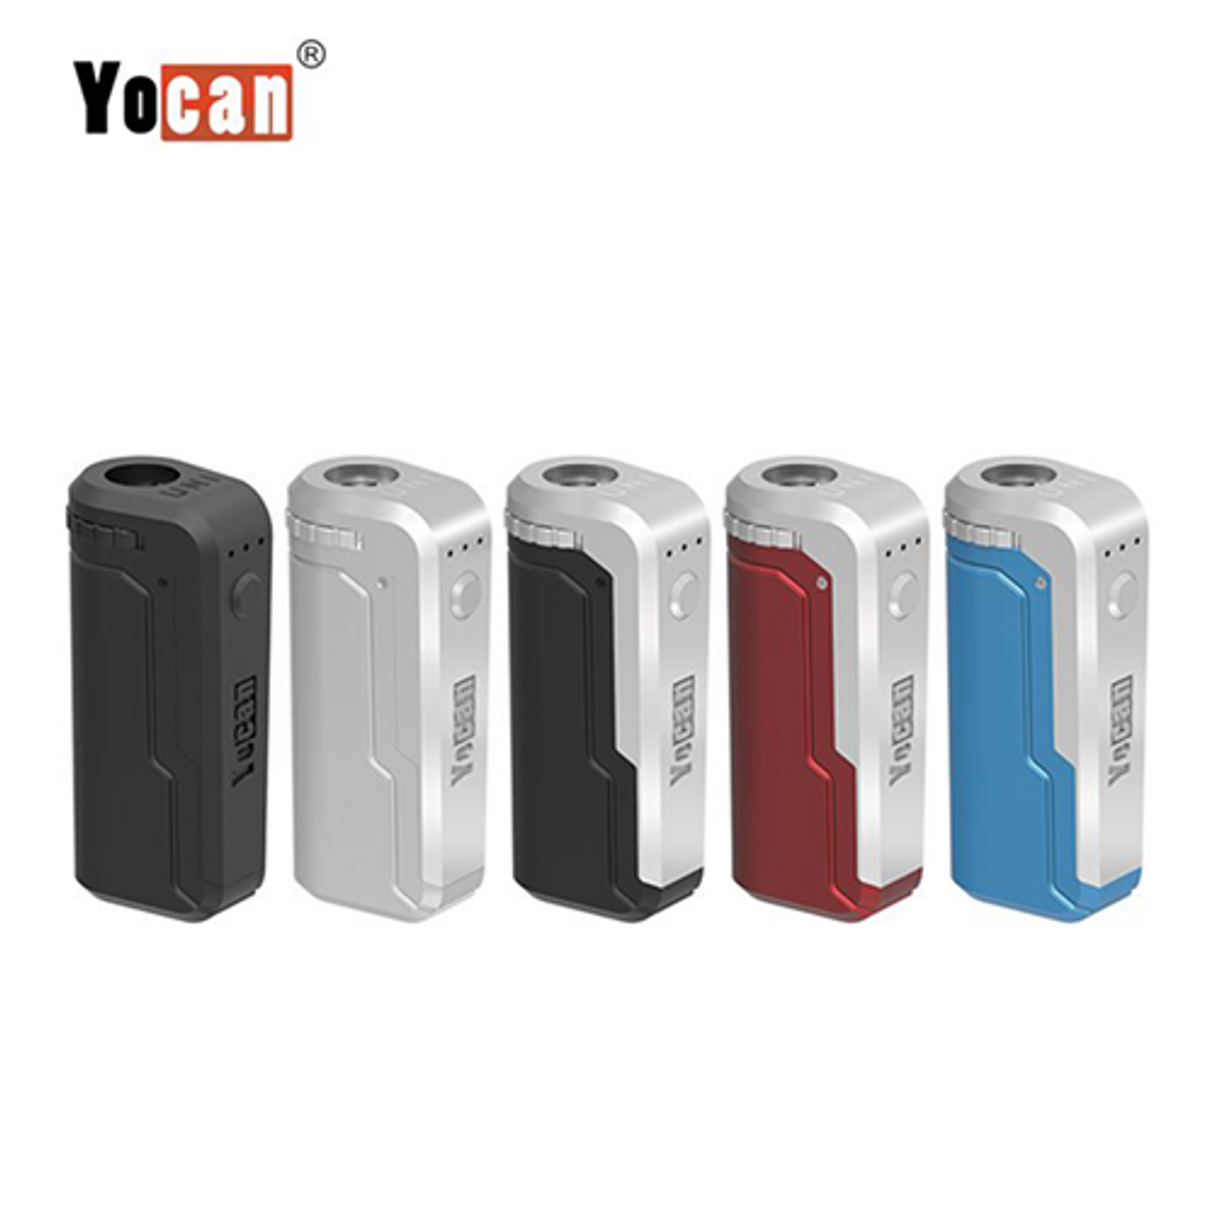 Yocan UNI Box Mod in Black, White, Gray, Red, and Blue - Compact 650mAh Vape Batteries